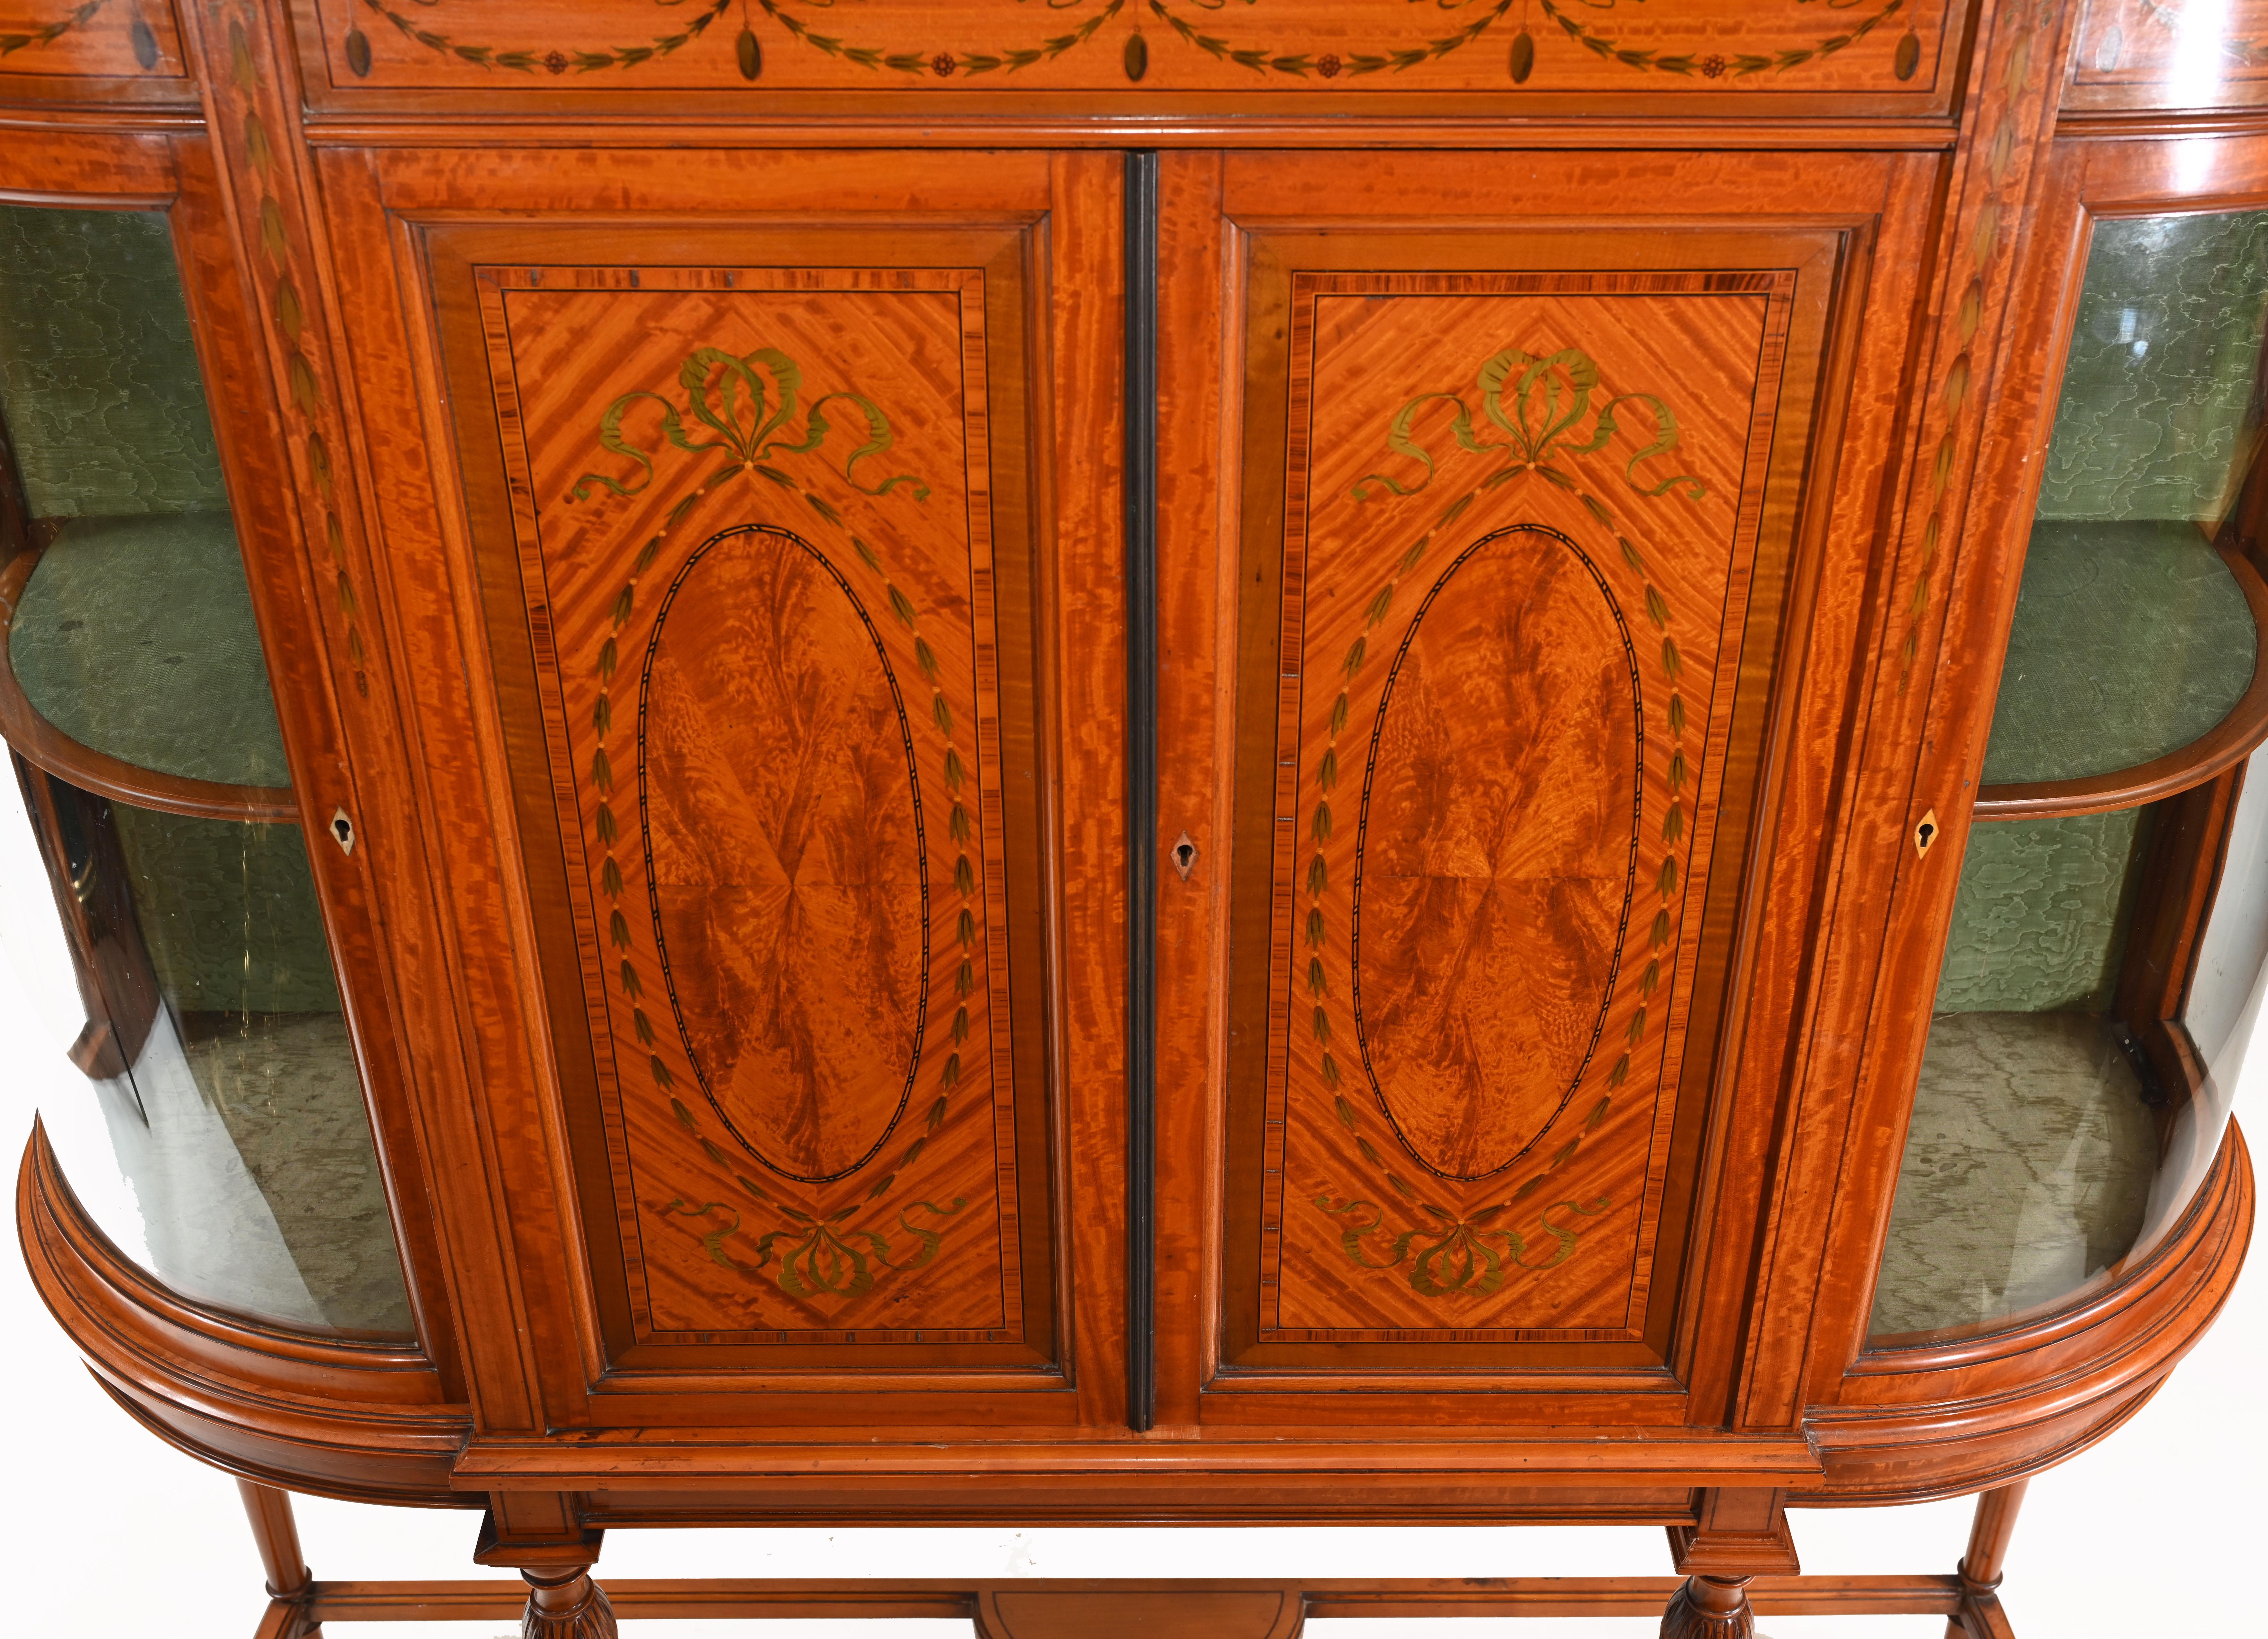 Extremely handsome antique bookcase or cabinet in satinwood
Piece is stamped by makers Maple & Co (please see close up photo)
Maple & Co. was a British furniture and upholstery manufacturer established in 1841 which found particular success during